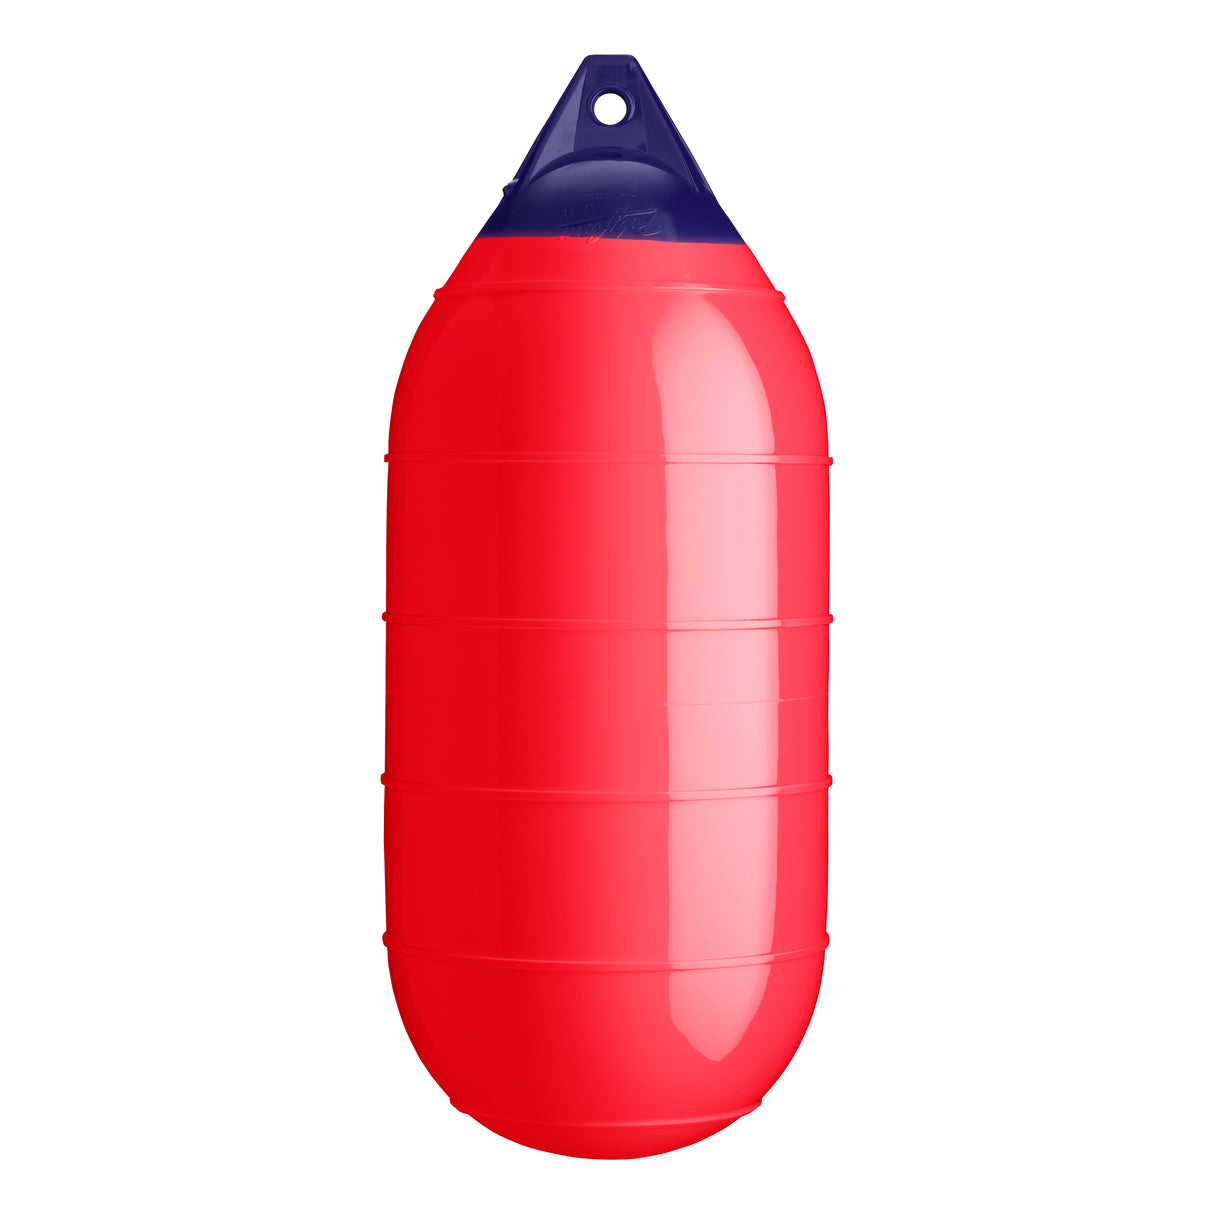 Red inflatable low drag buoy, Polyform LD-4 